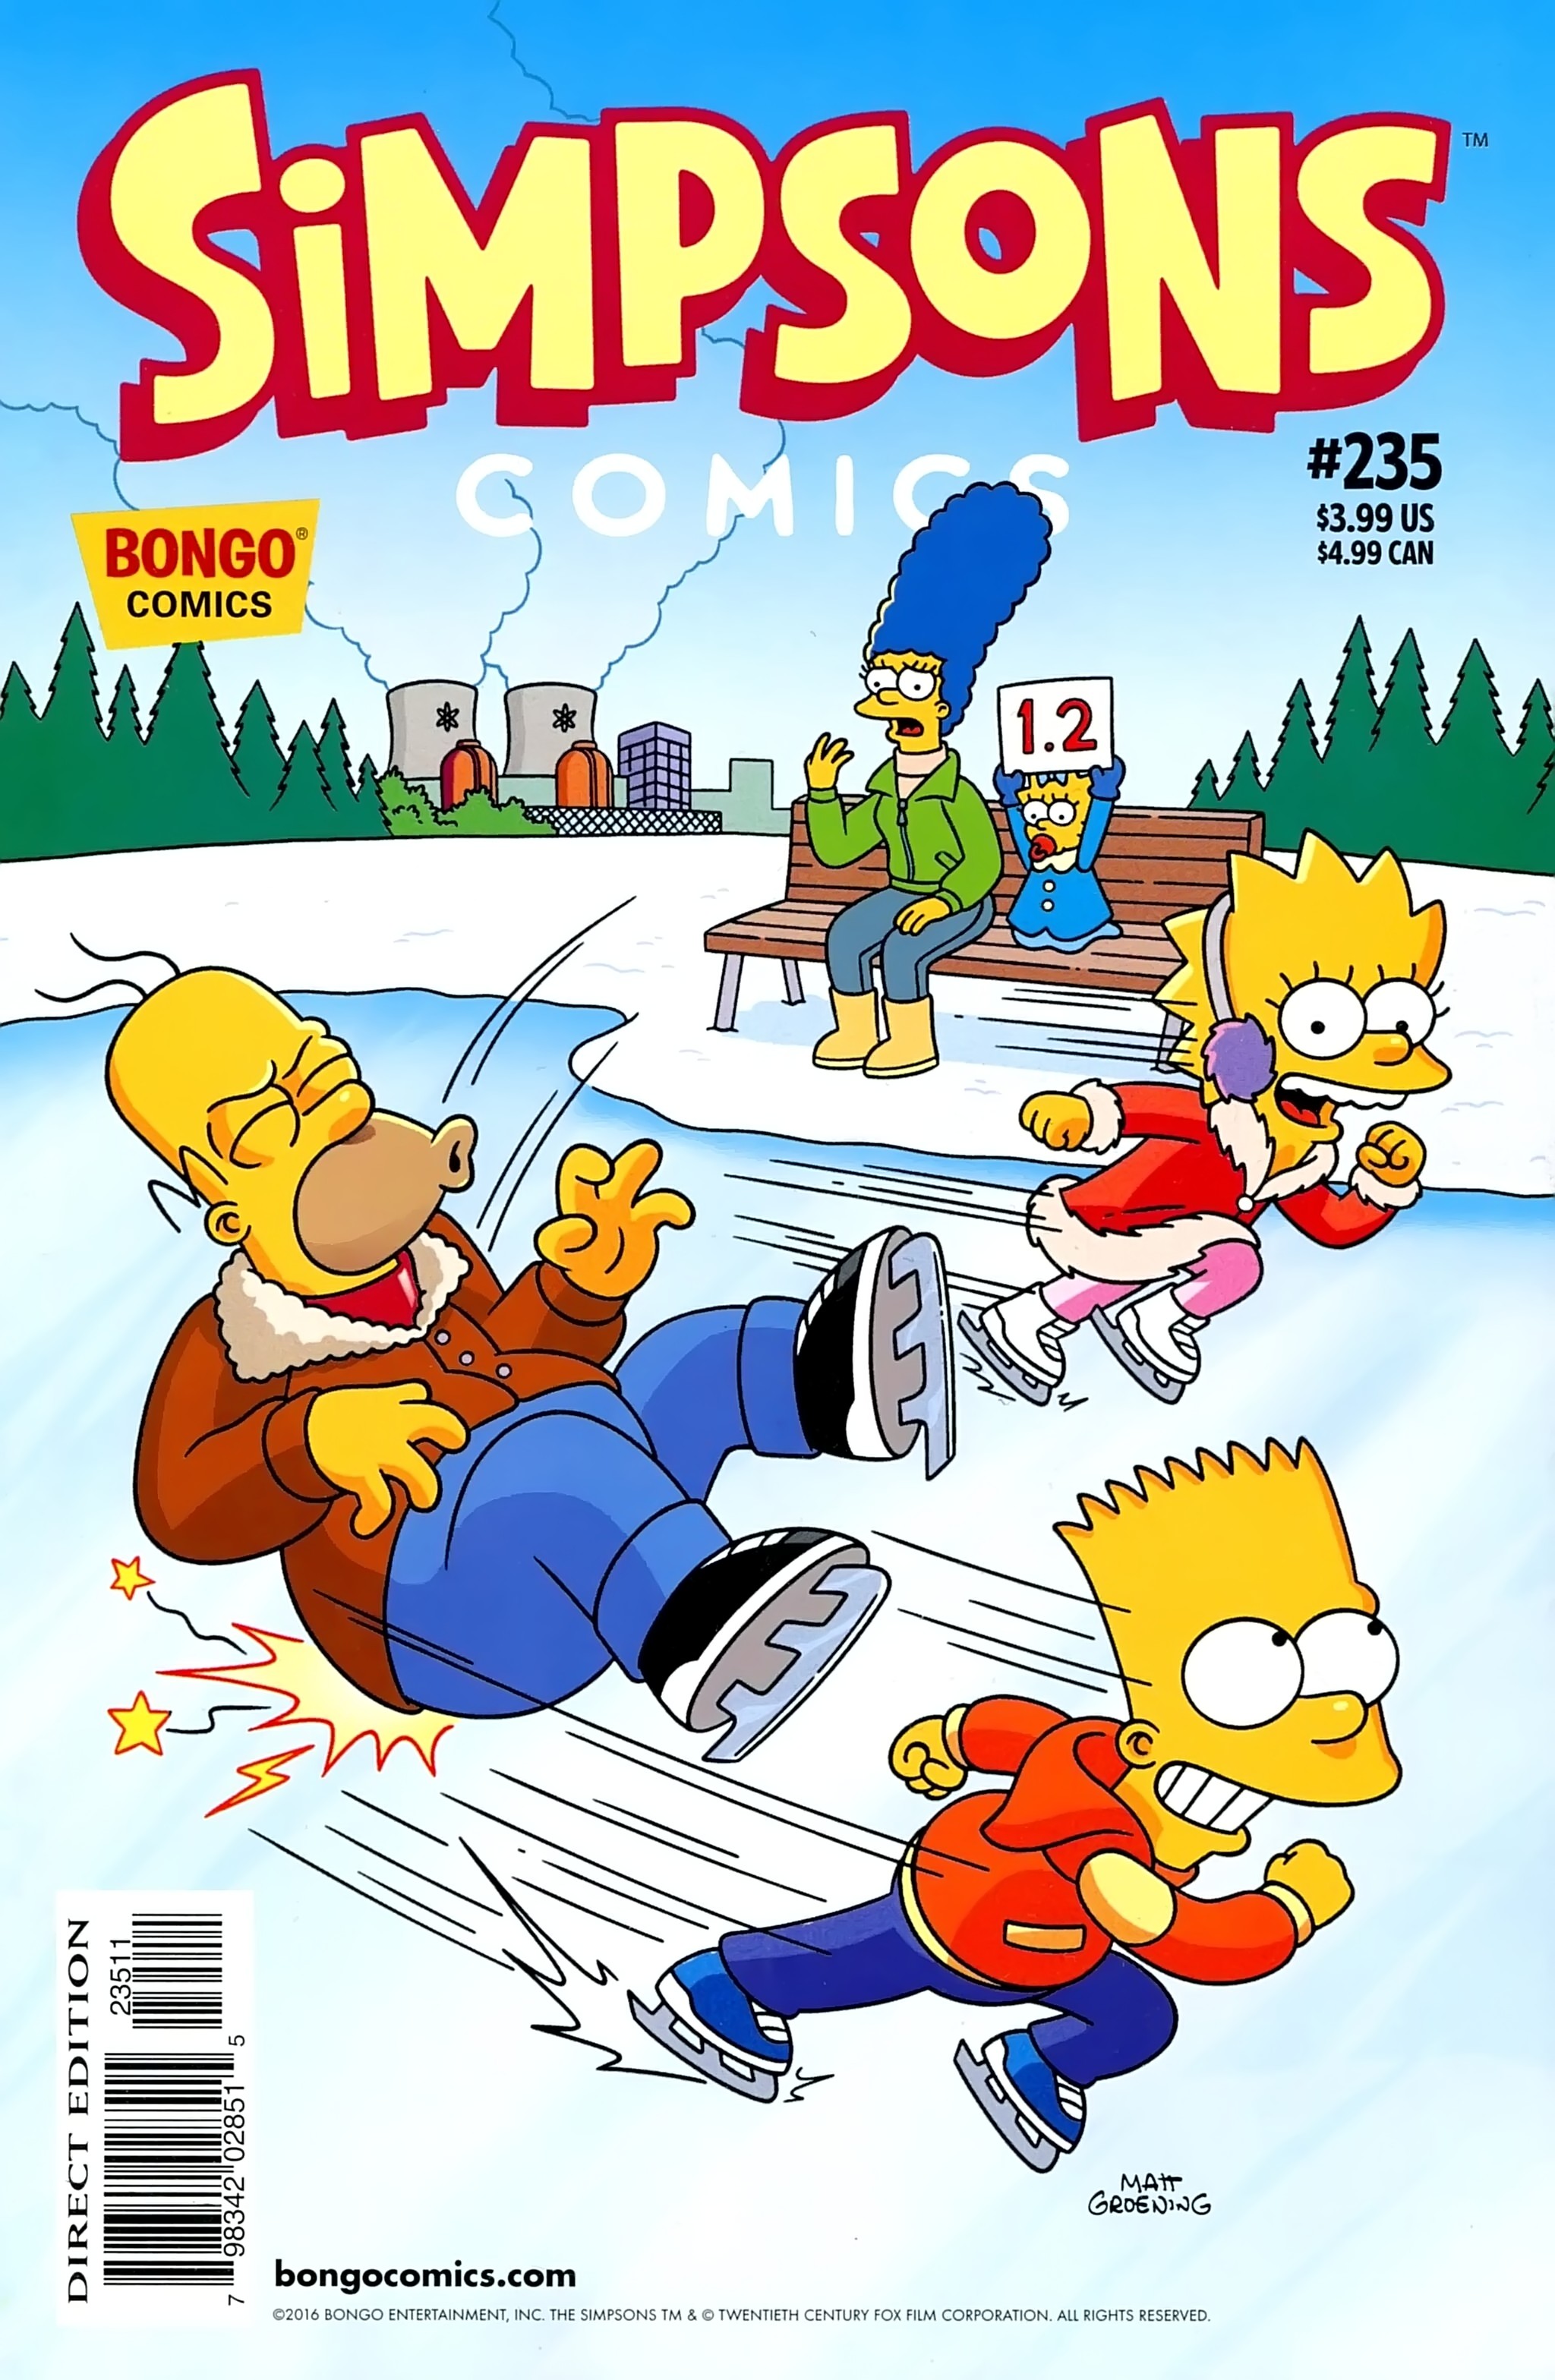 Simpsons Comics (1993-): Chapter 235 - Page 1